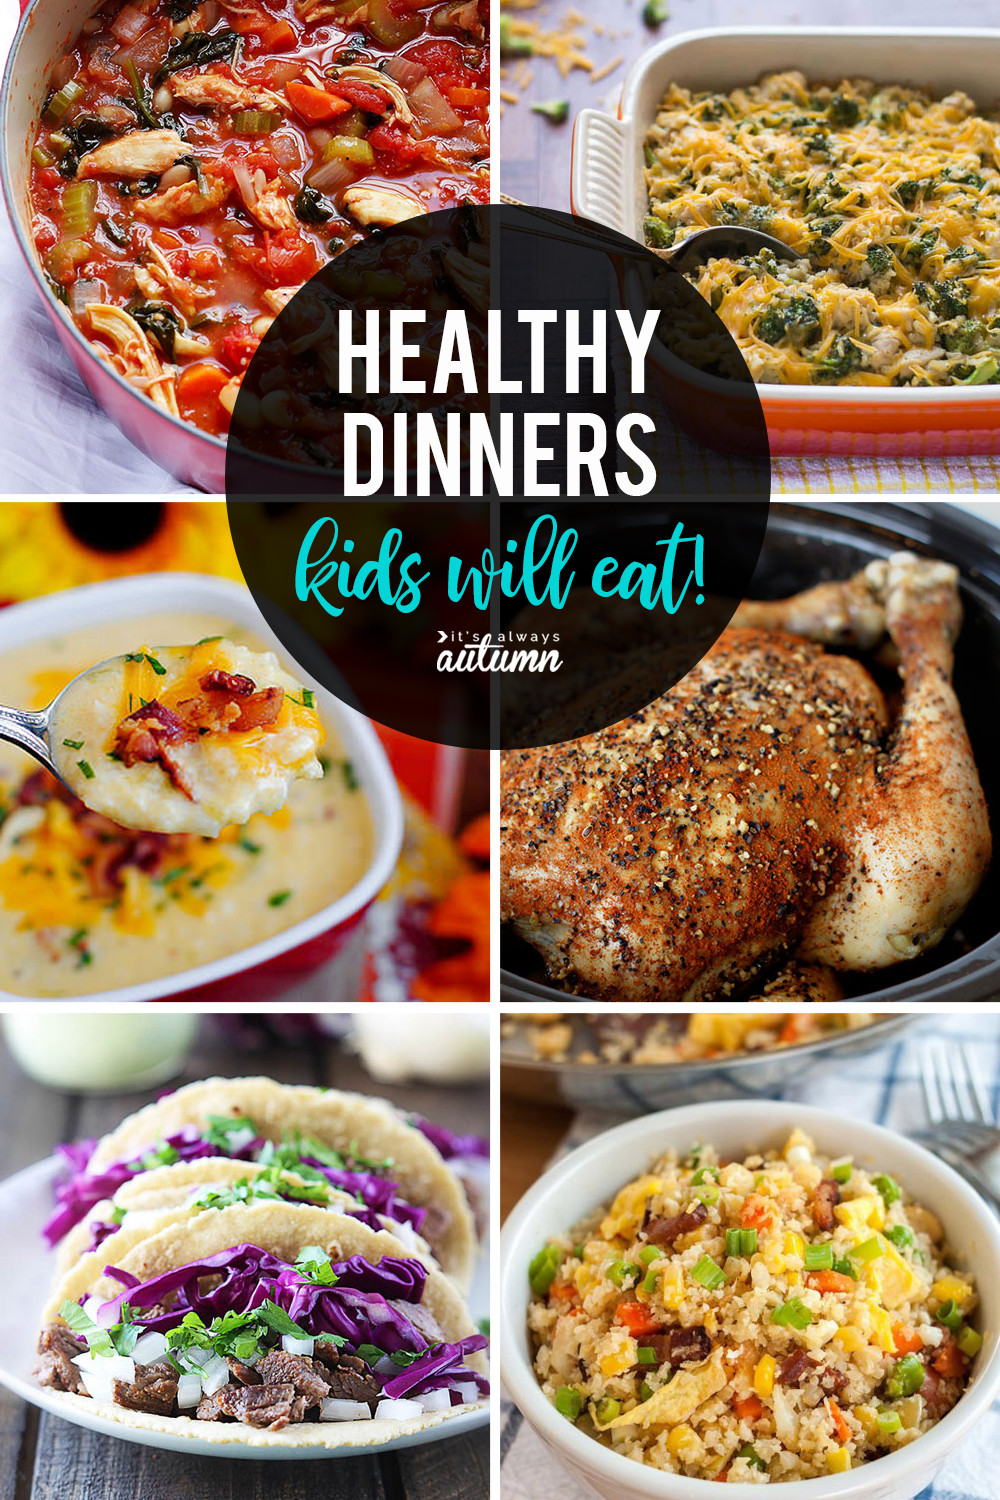 Recipes For Kids Dinner
 20 healthy easy recipes your kids will actually want to